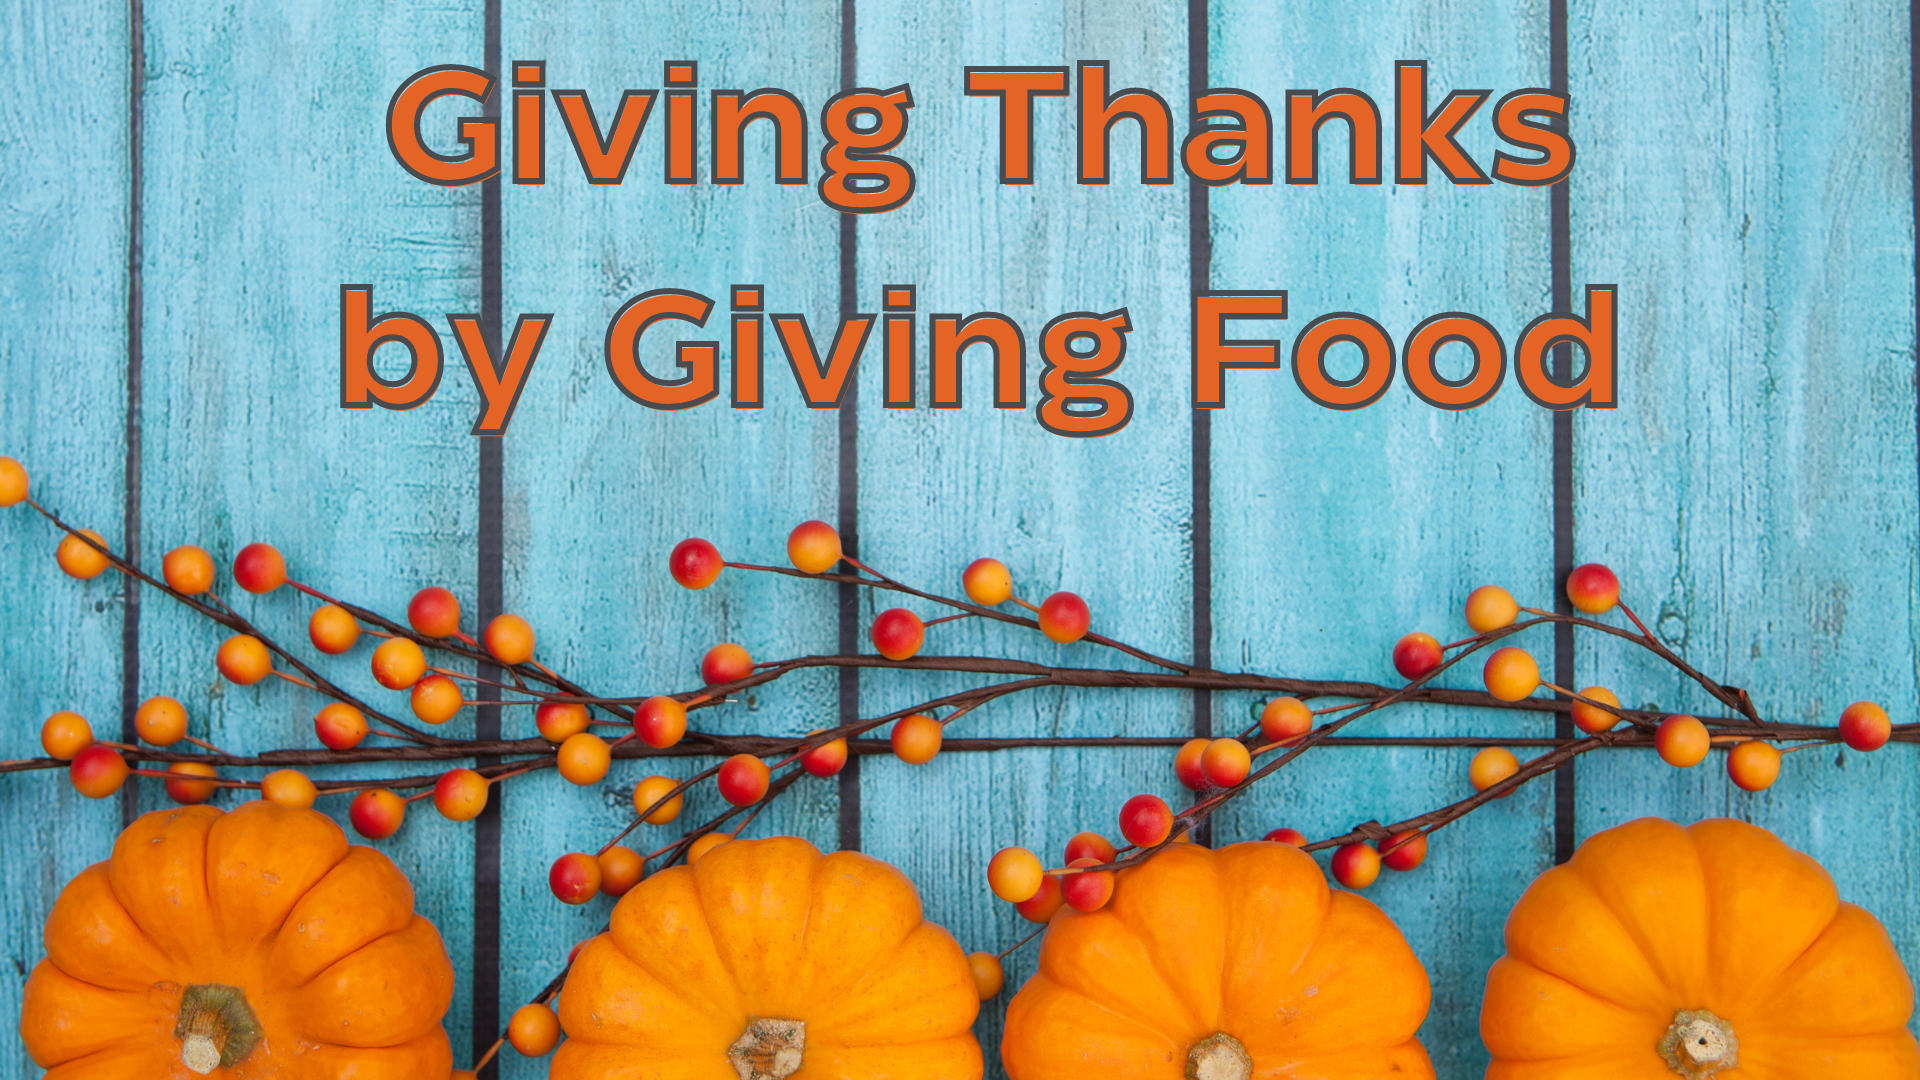 Giving Thanks by Giving Food